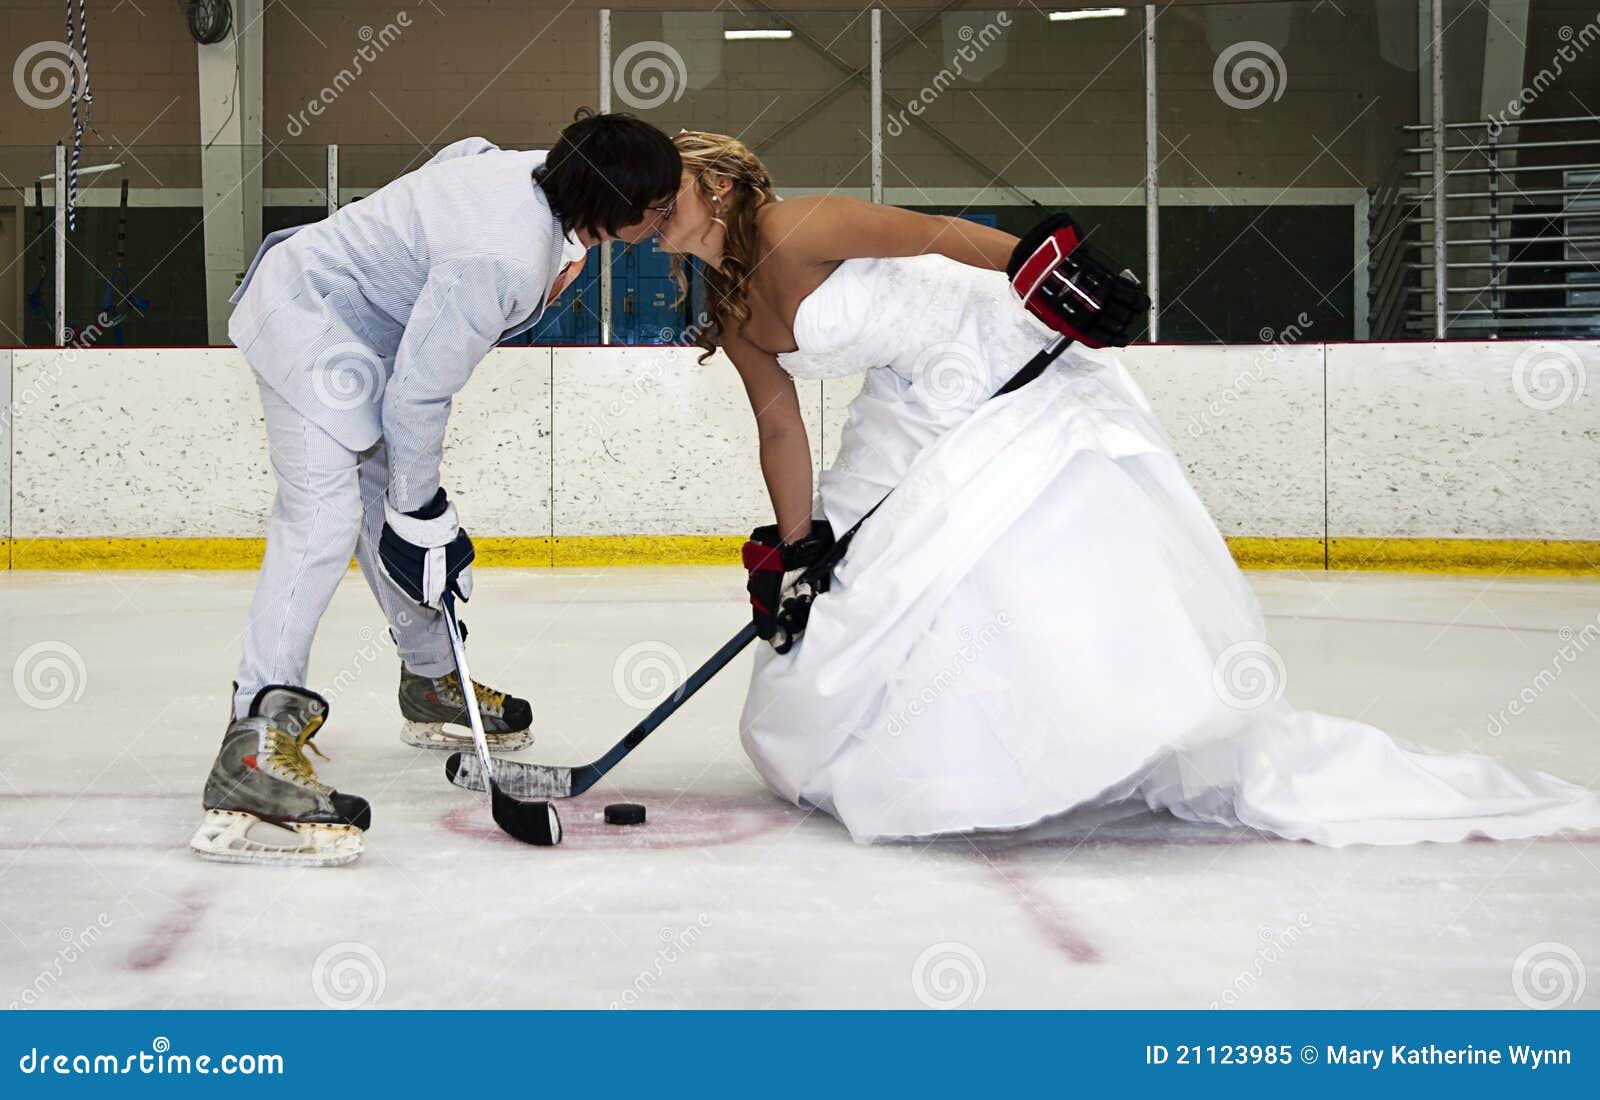 bride and groom hockey face off